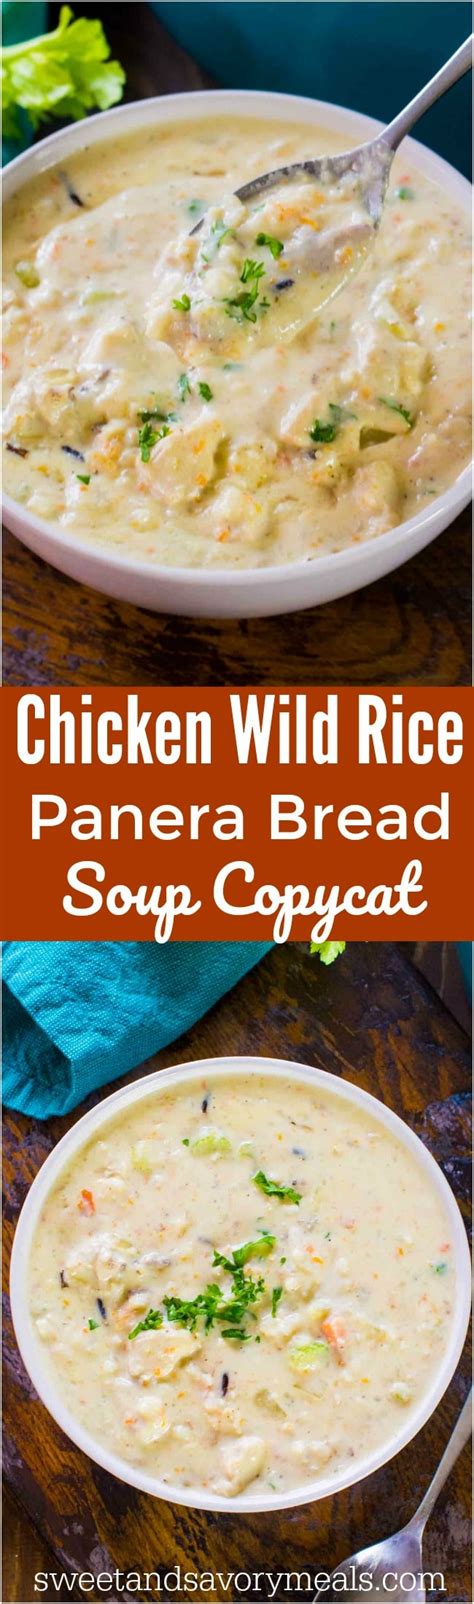 Add the bone broth and the milk and whisk until all of the lumps are removed. Panera Bread Chicken Wild Rice Soup - Copycat - Sweet and ...